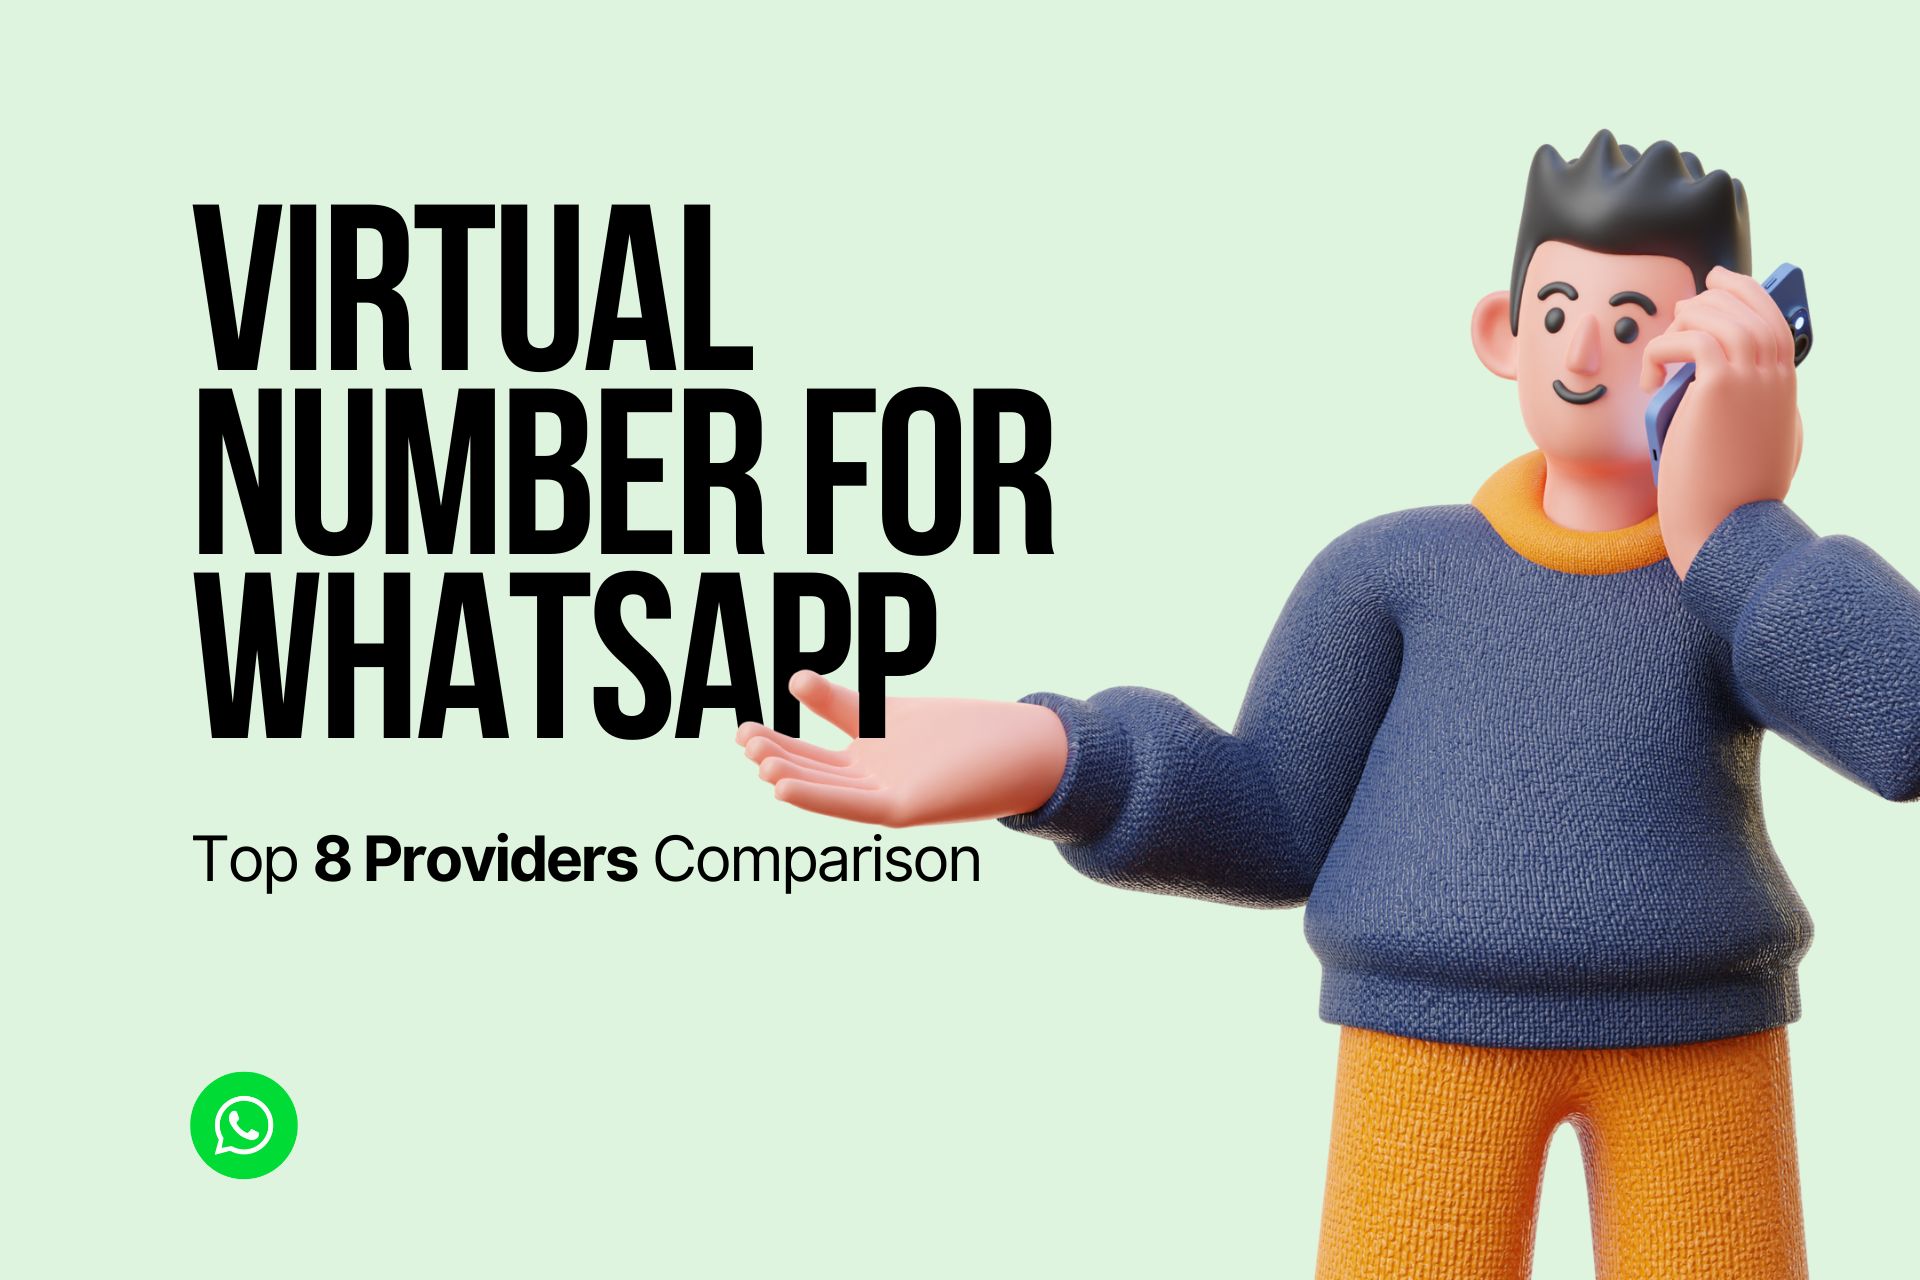 Virtual Number for WhatsApp: Top 8 Providers Comparison